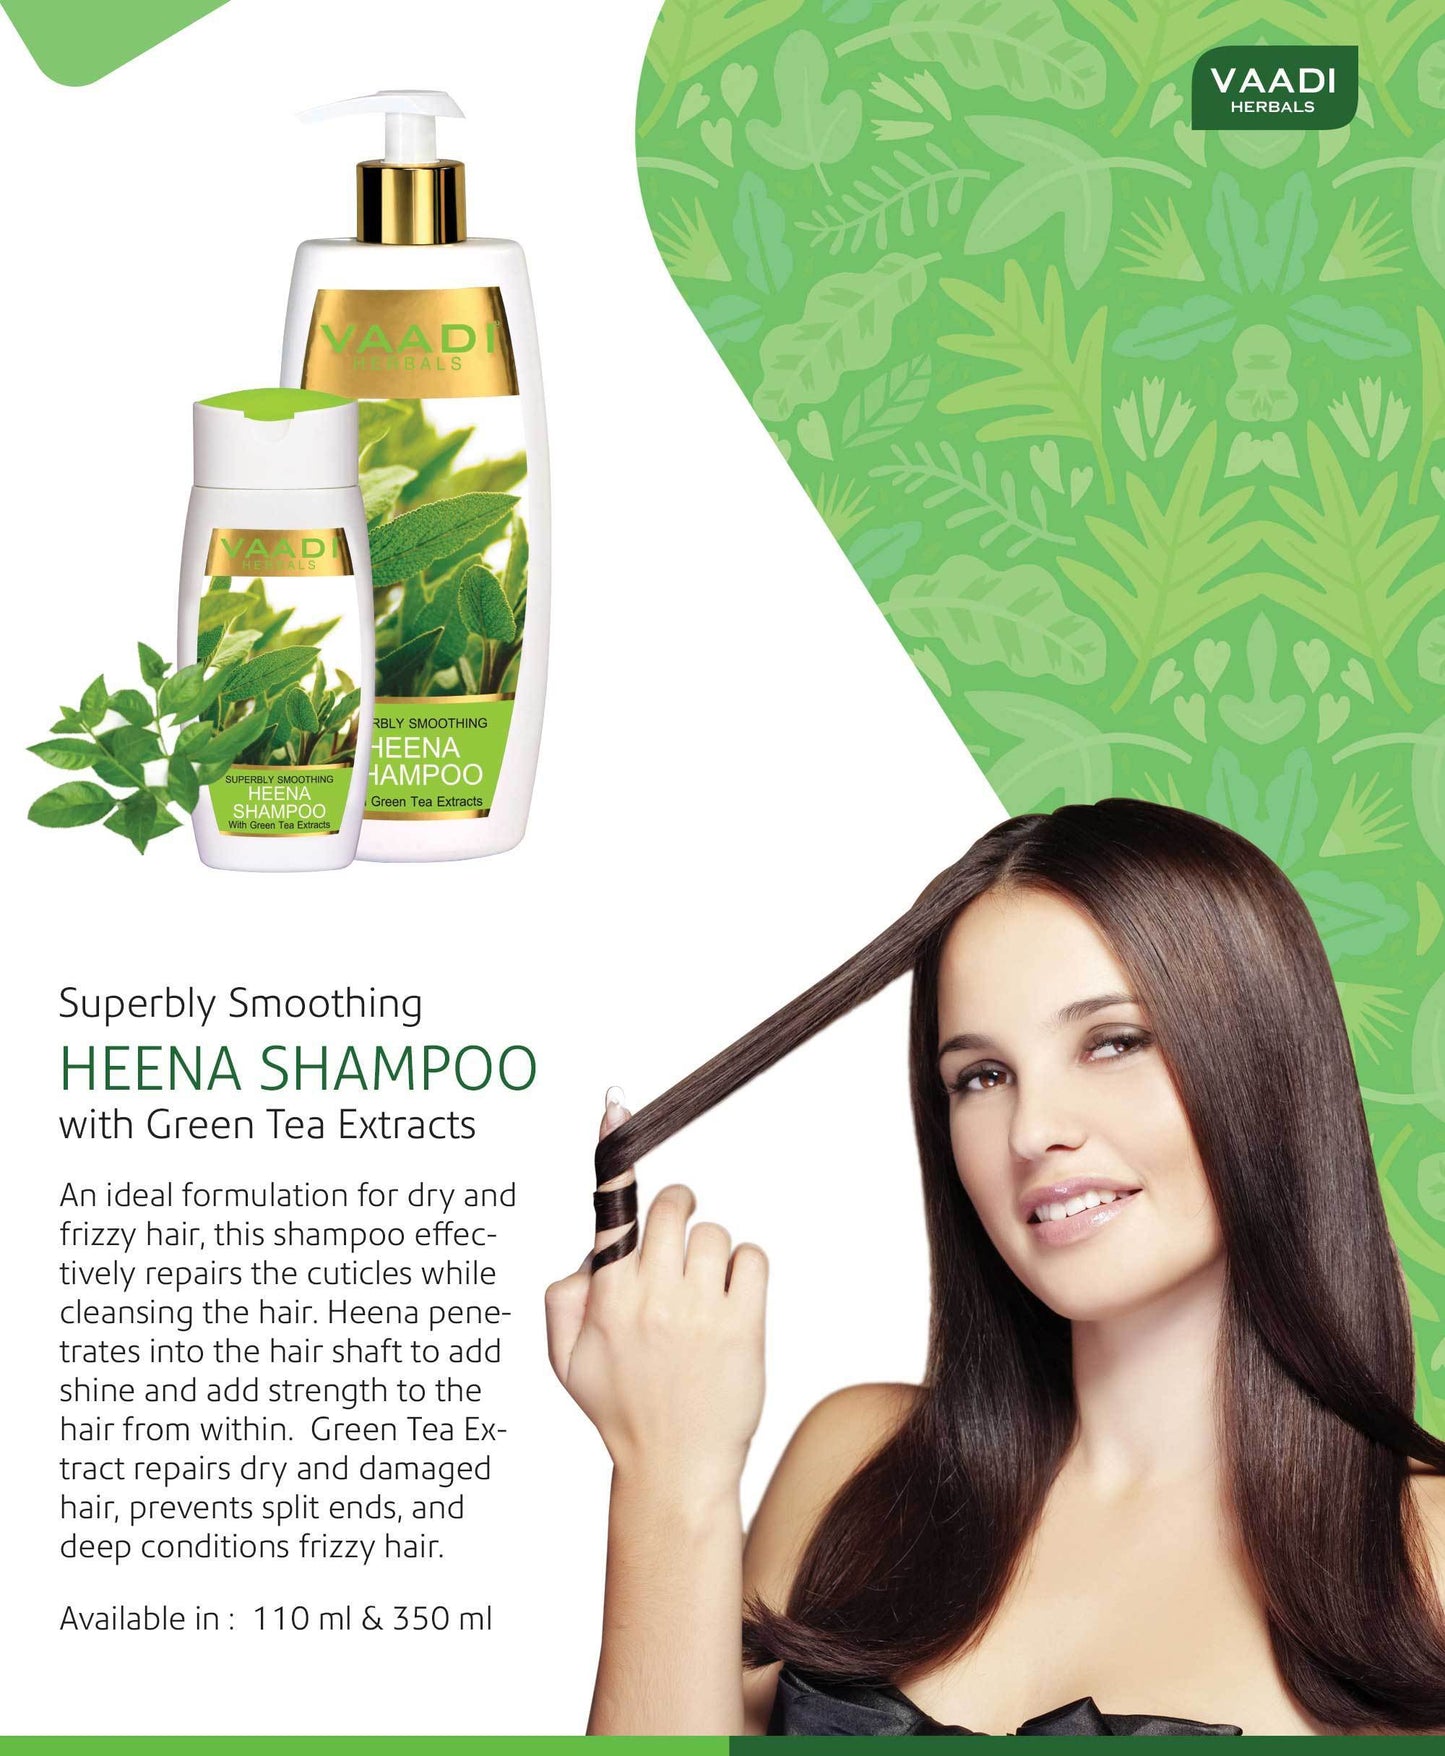 Superbly Smoothing Organic Heena Shampoo with Green Tea Extract - Controls Dry Frizzy Hair - Strengthens Hair (3 x 110 ml/4 fl oz)